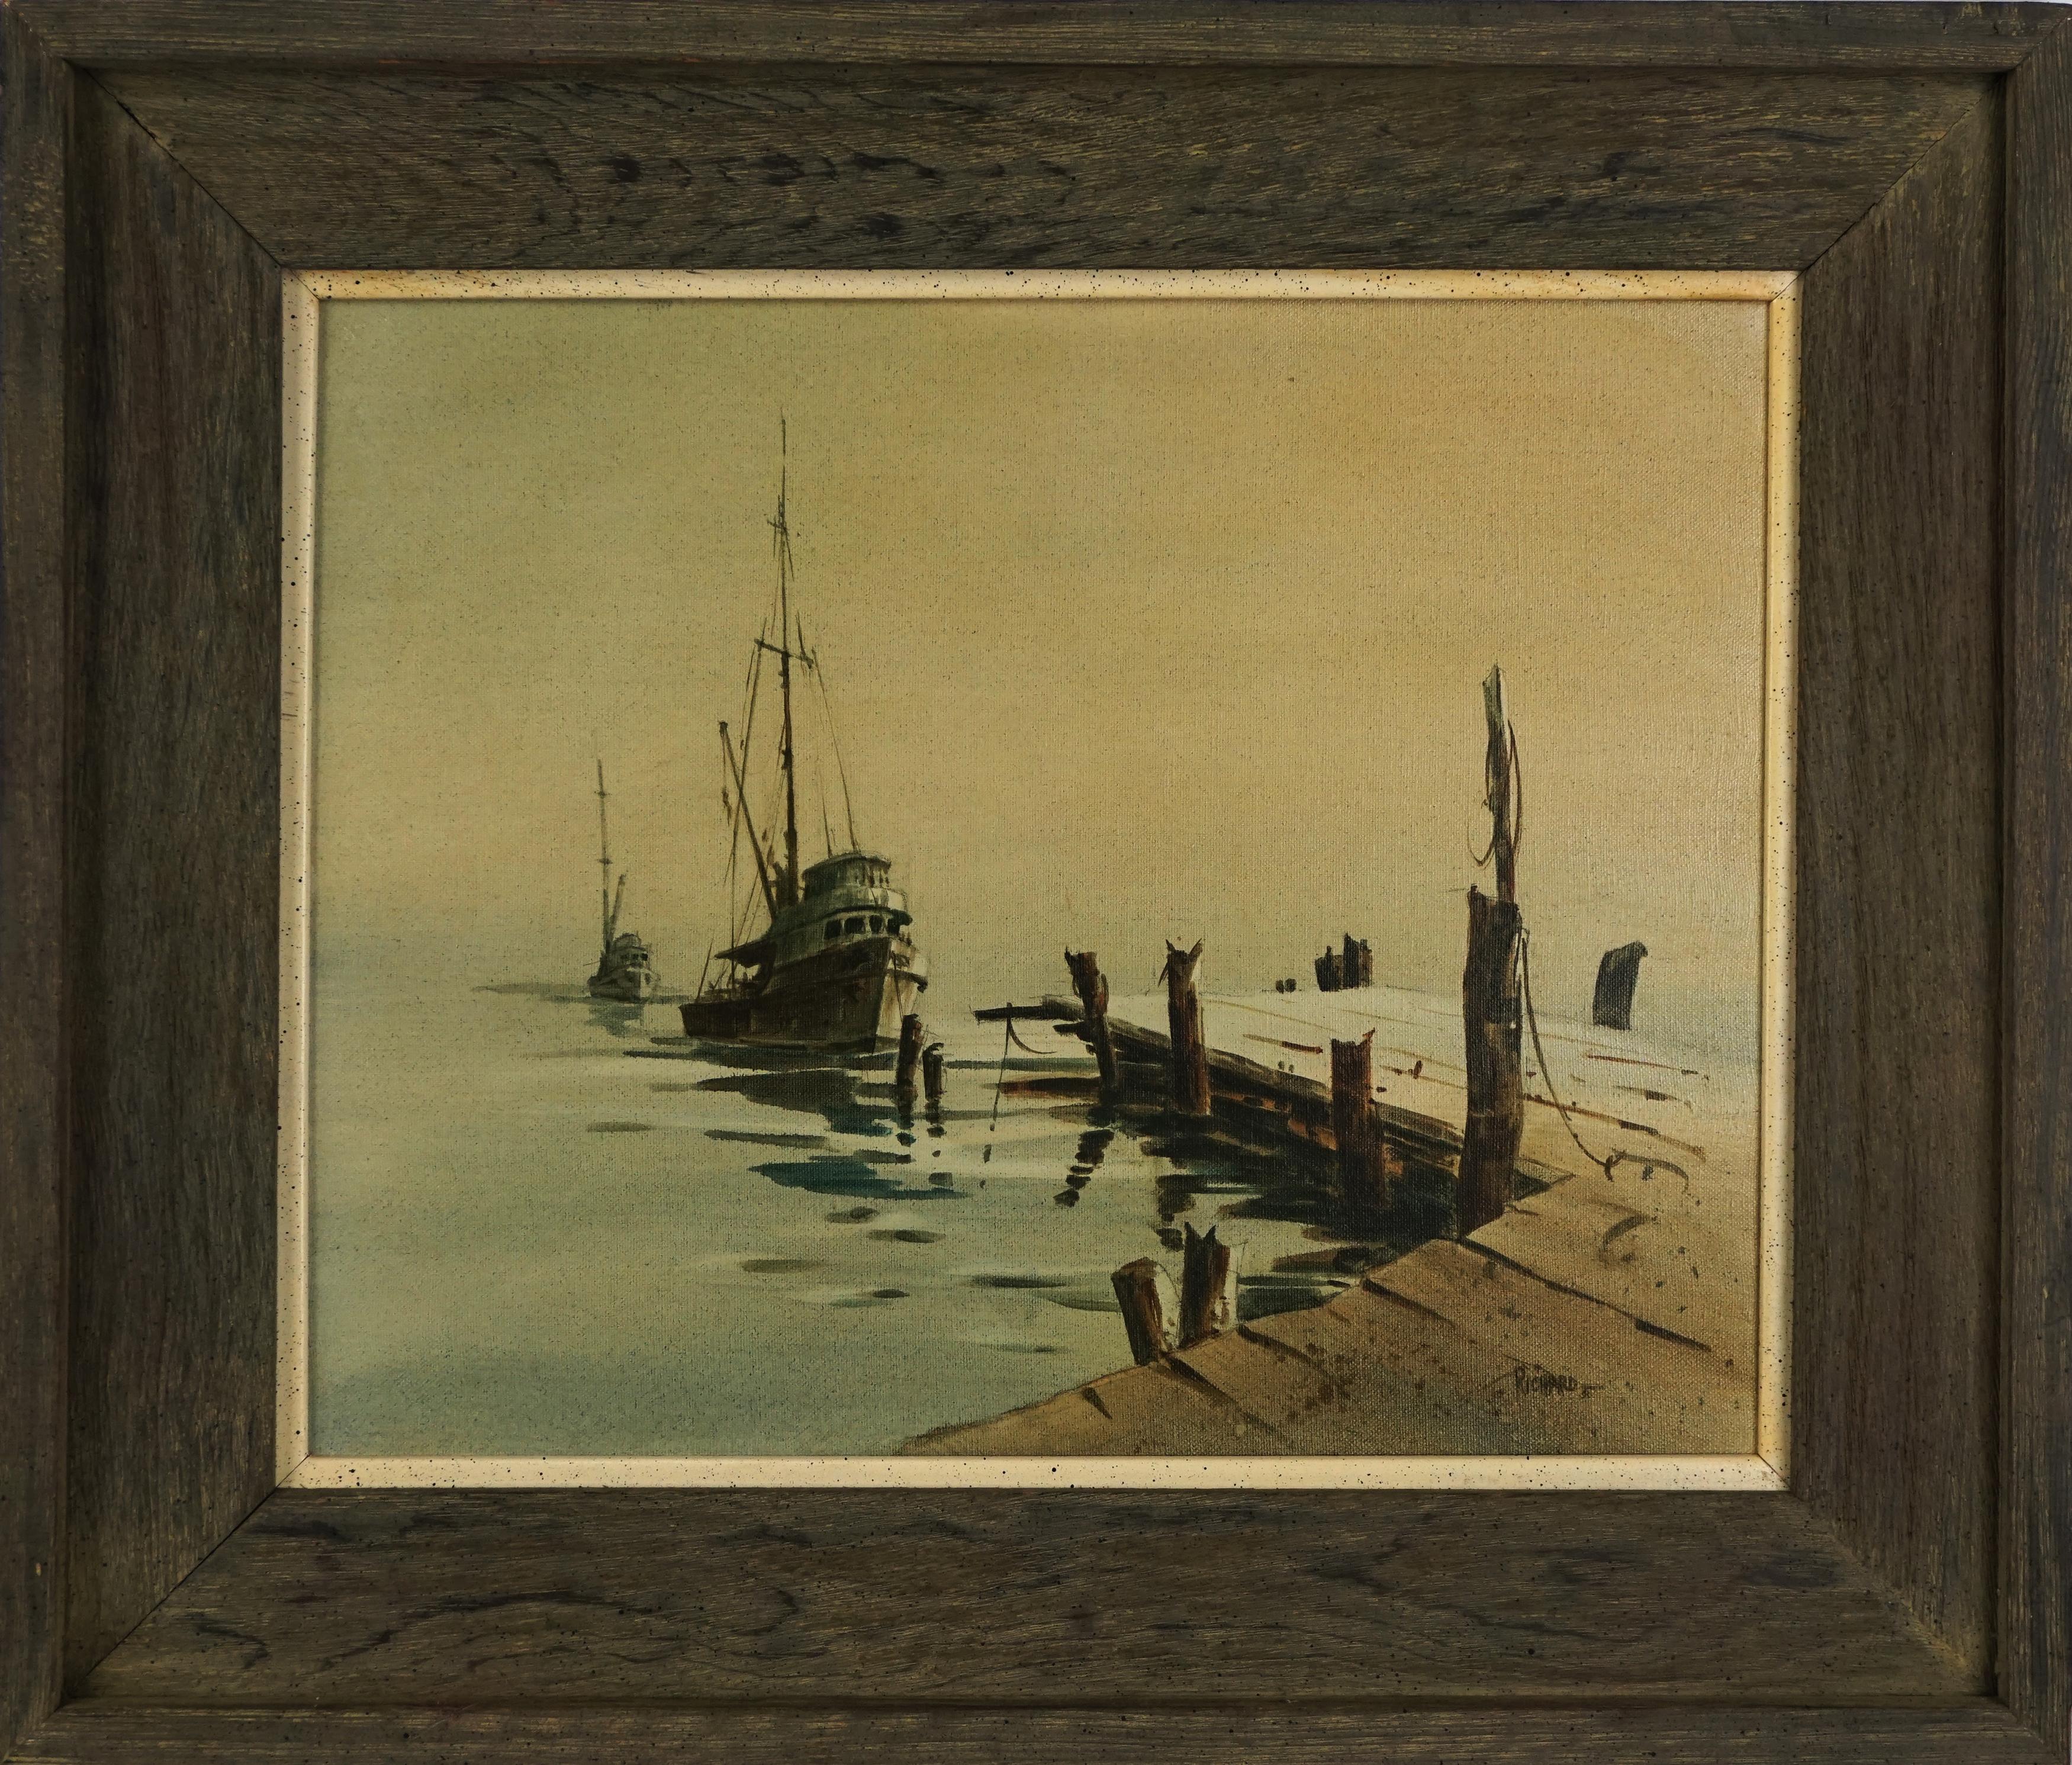 Richard Soderman Landscape Painting - Vintage Southern California Seascape with Boats -- "Foggy Morn"